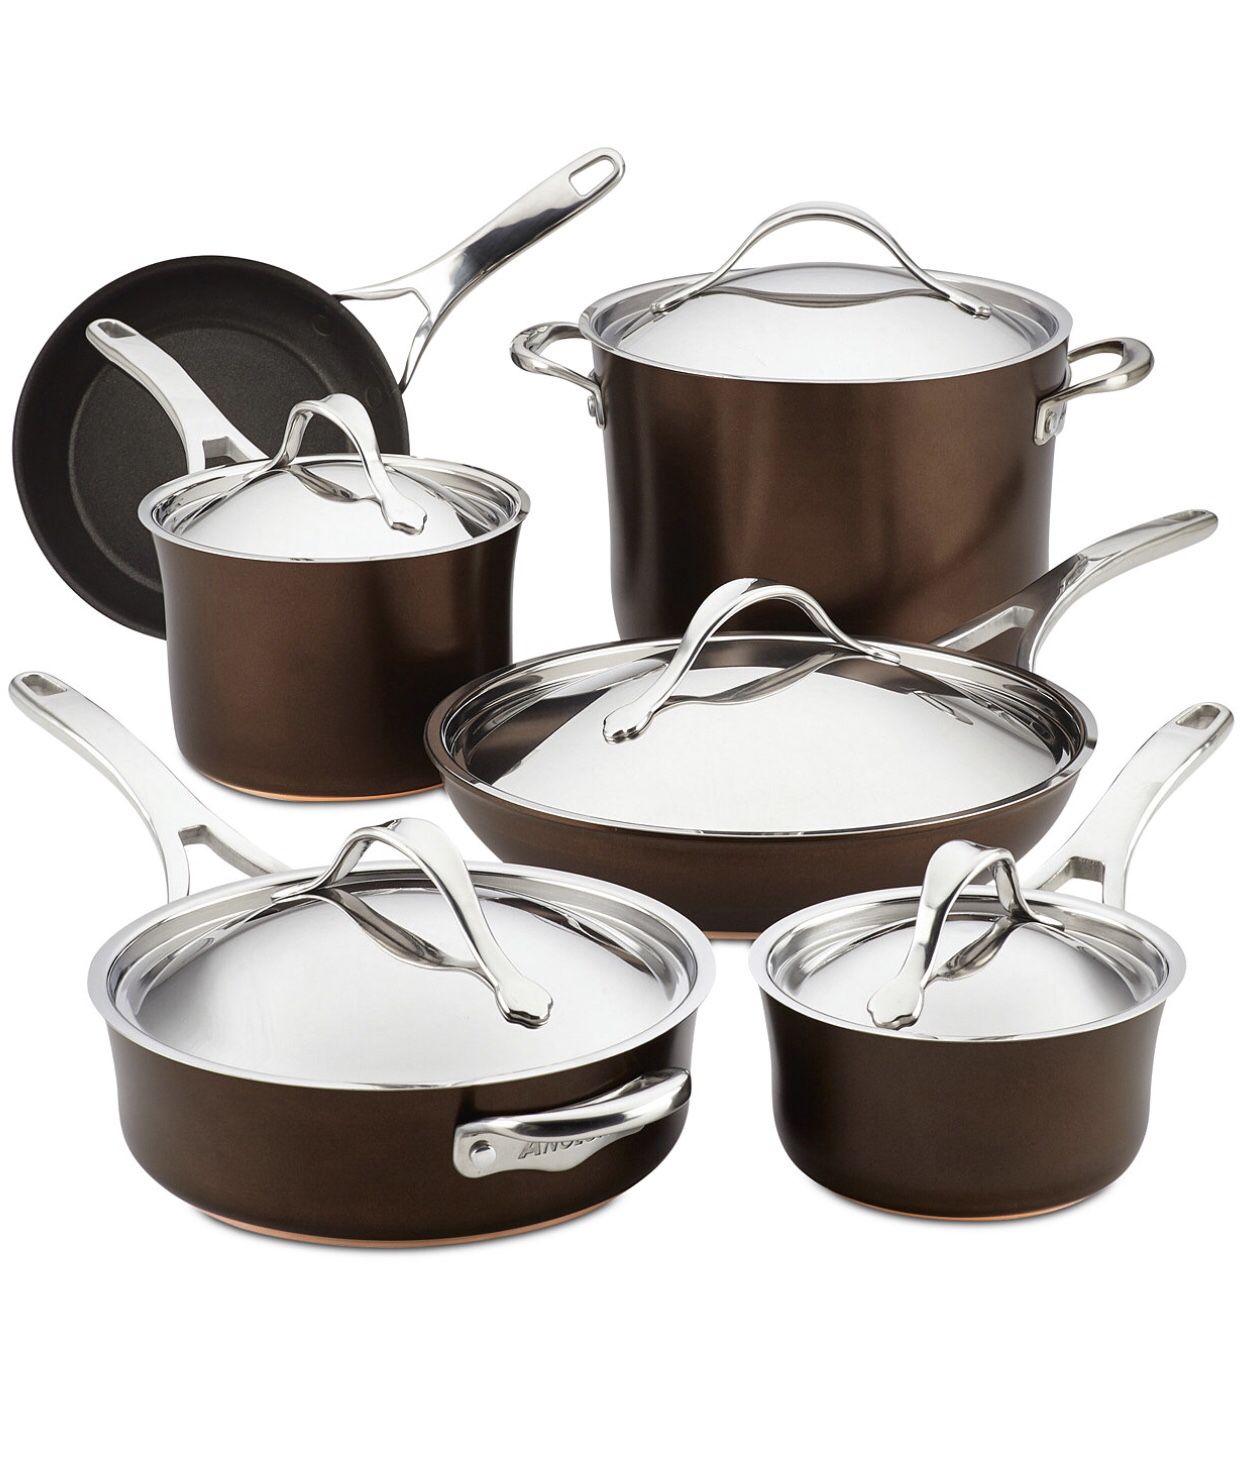 Anolon - Hard anodized cookware ( brand new )